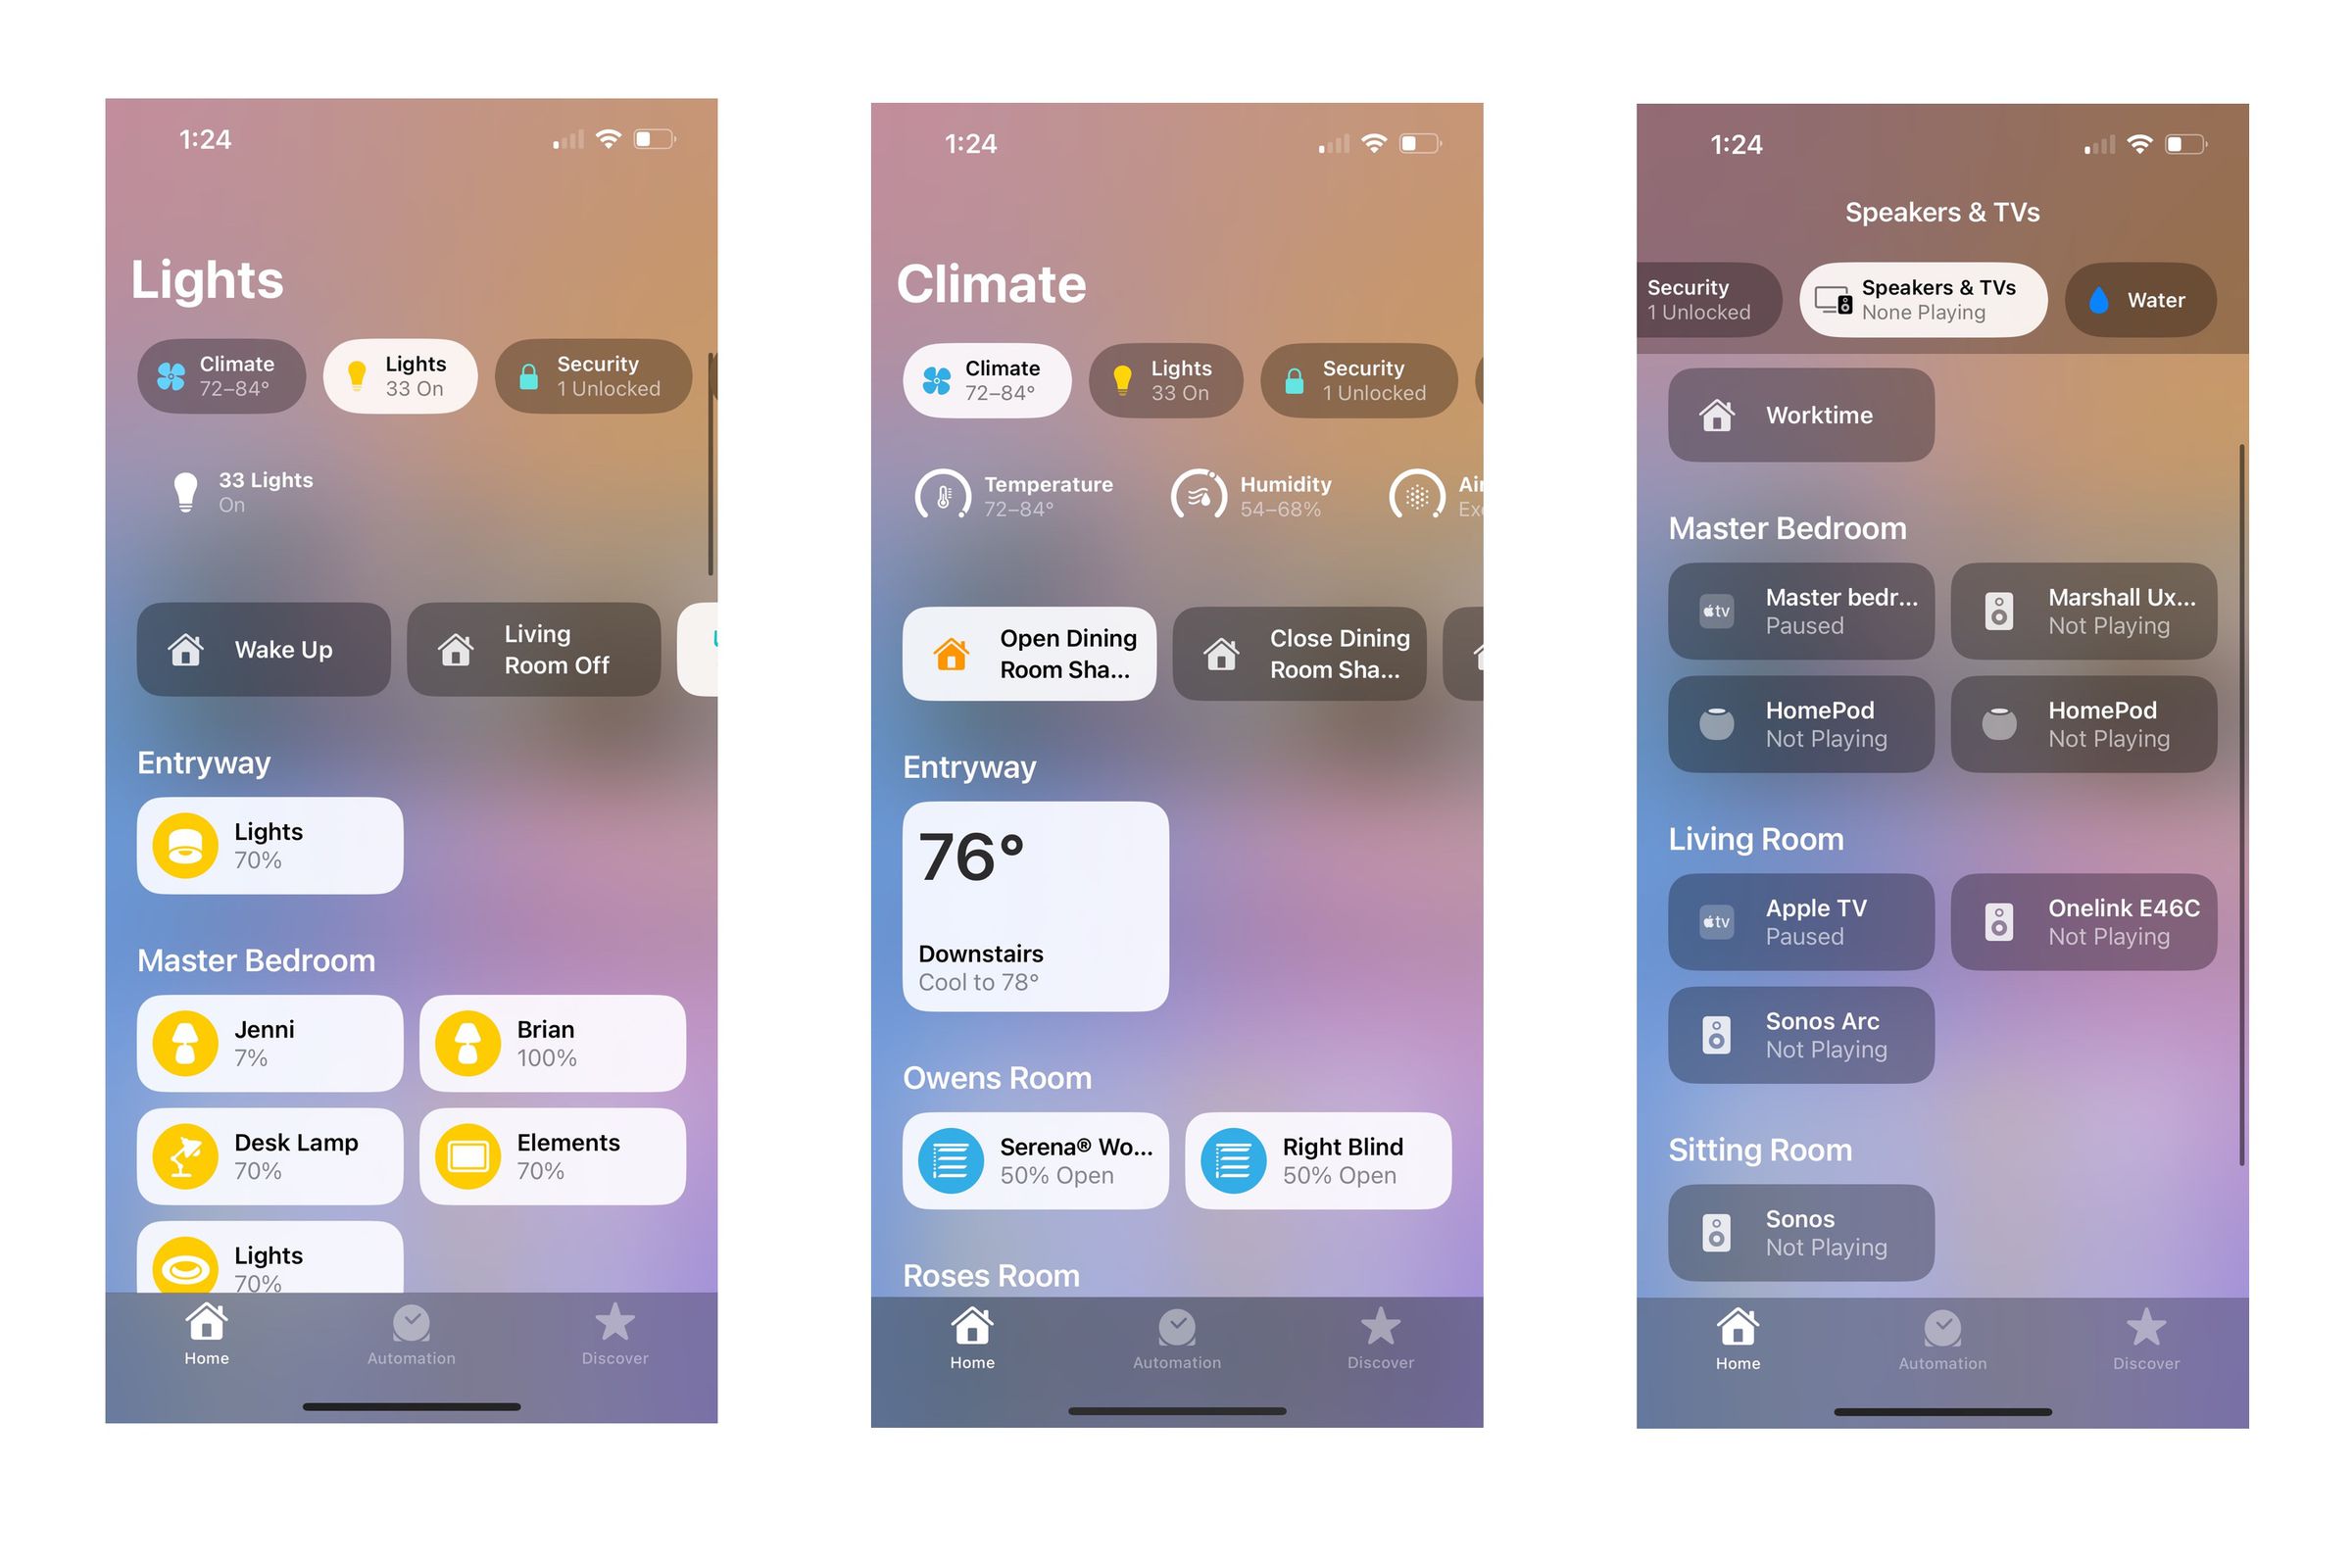 New shortcut buttons at the top of the Home View quickly show only specific device types, including Lights, Climate, Speakers & TV, as well as Security, and Water.